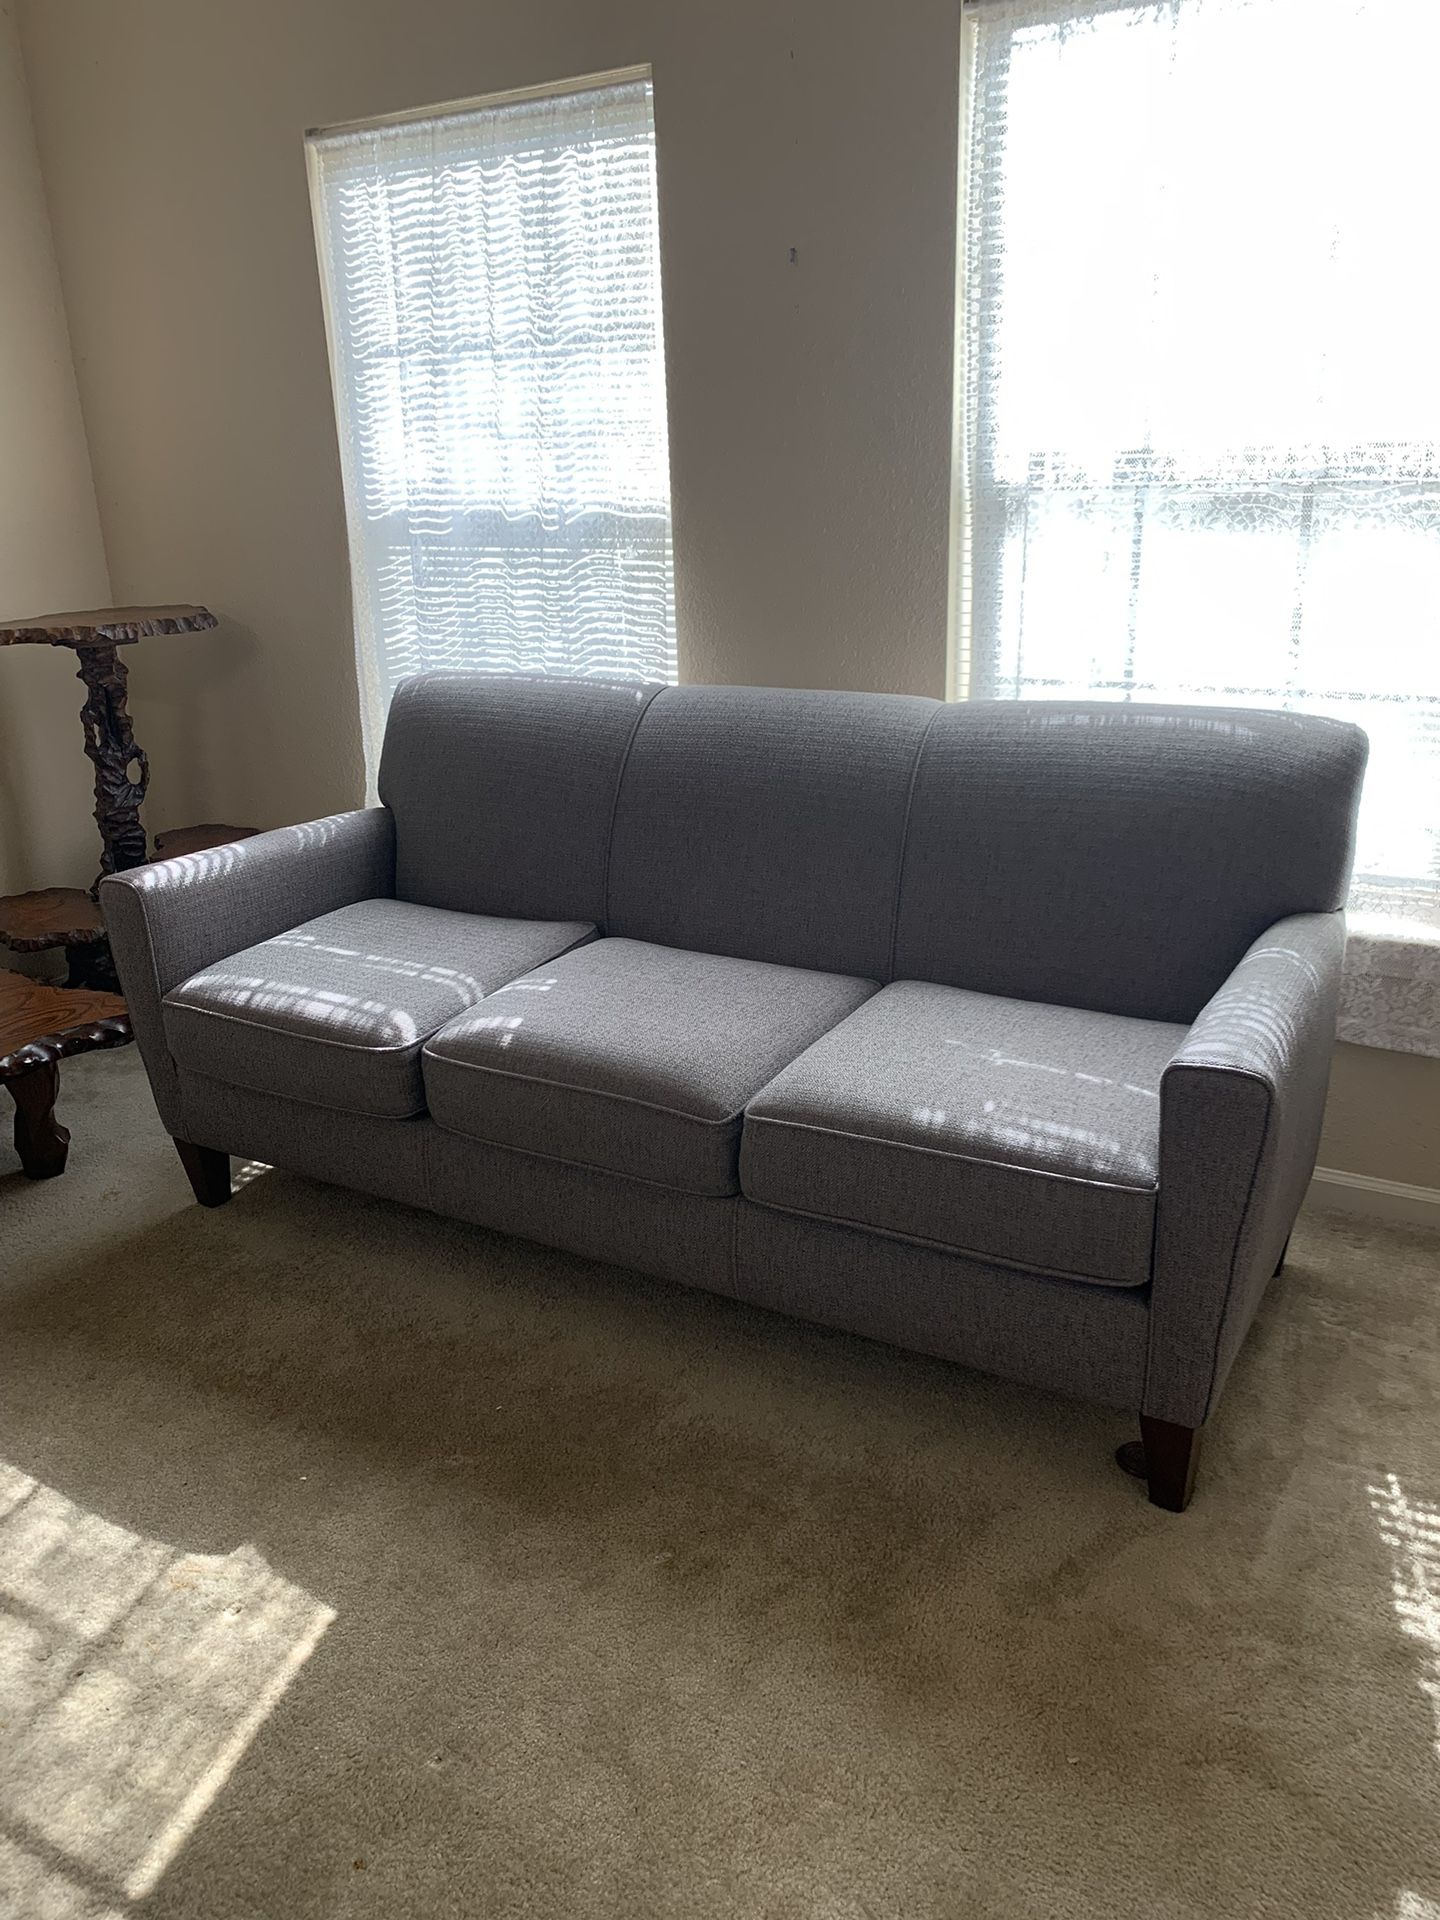 Living Room Couch + Two Pillows (Like Brand New)